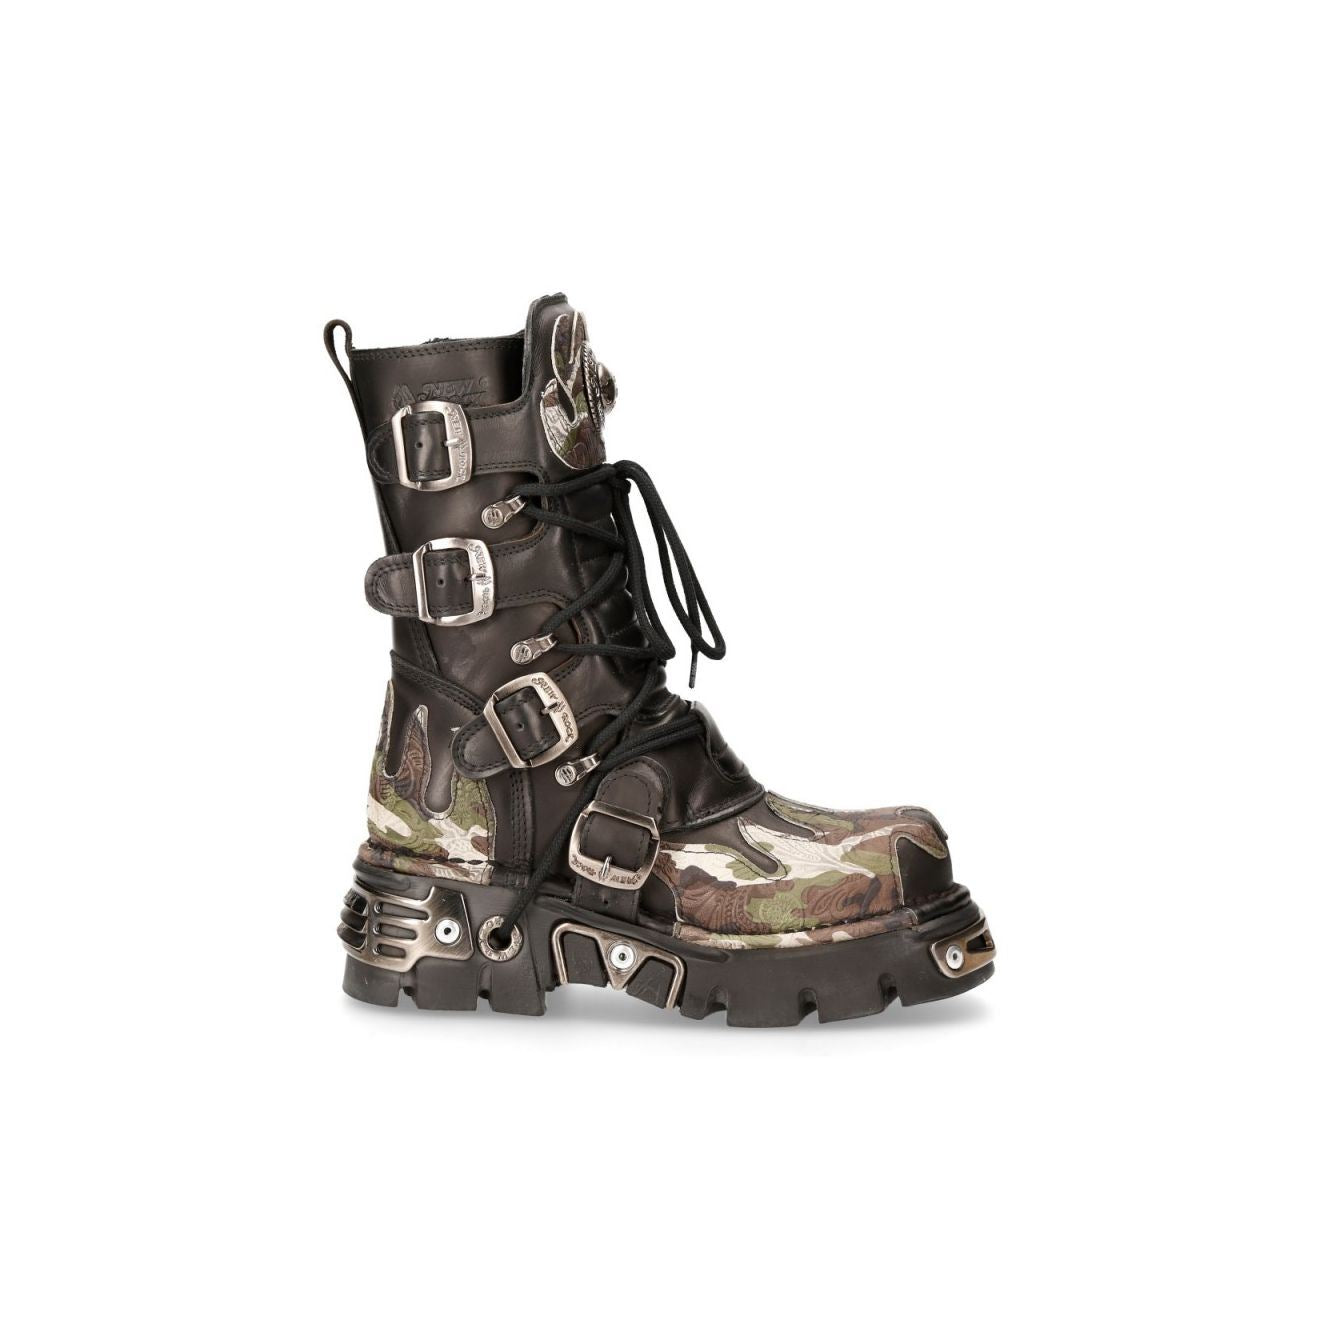 New Rock Flame Accented Camouflage Leather Biker Boots- M-591-S15